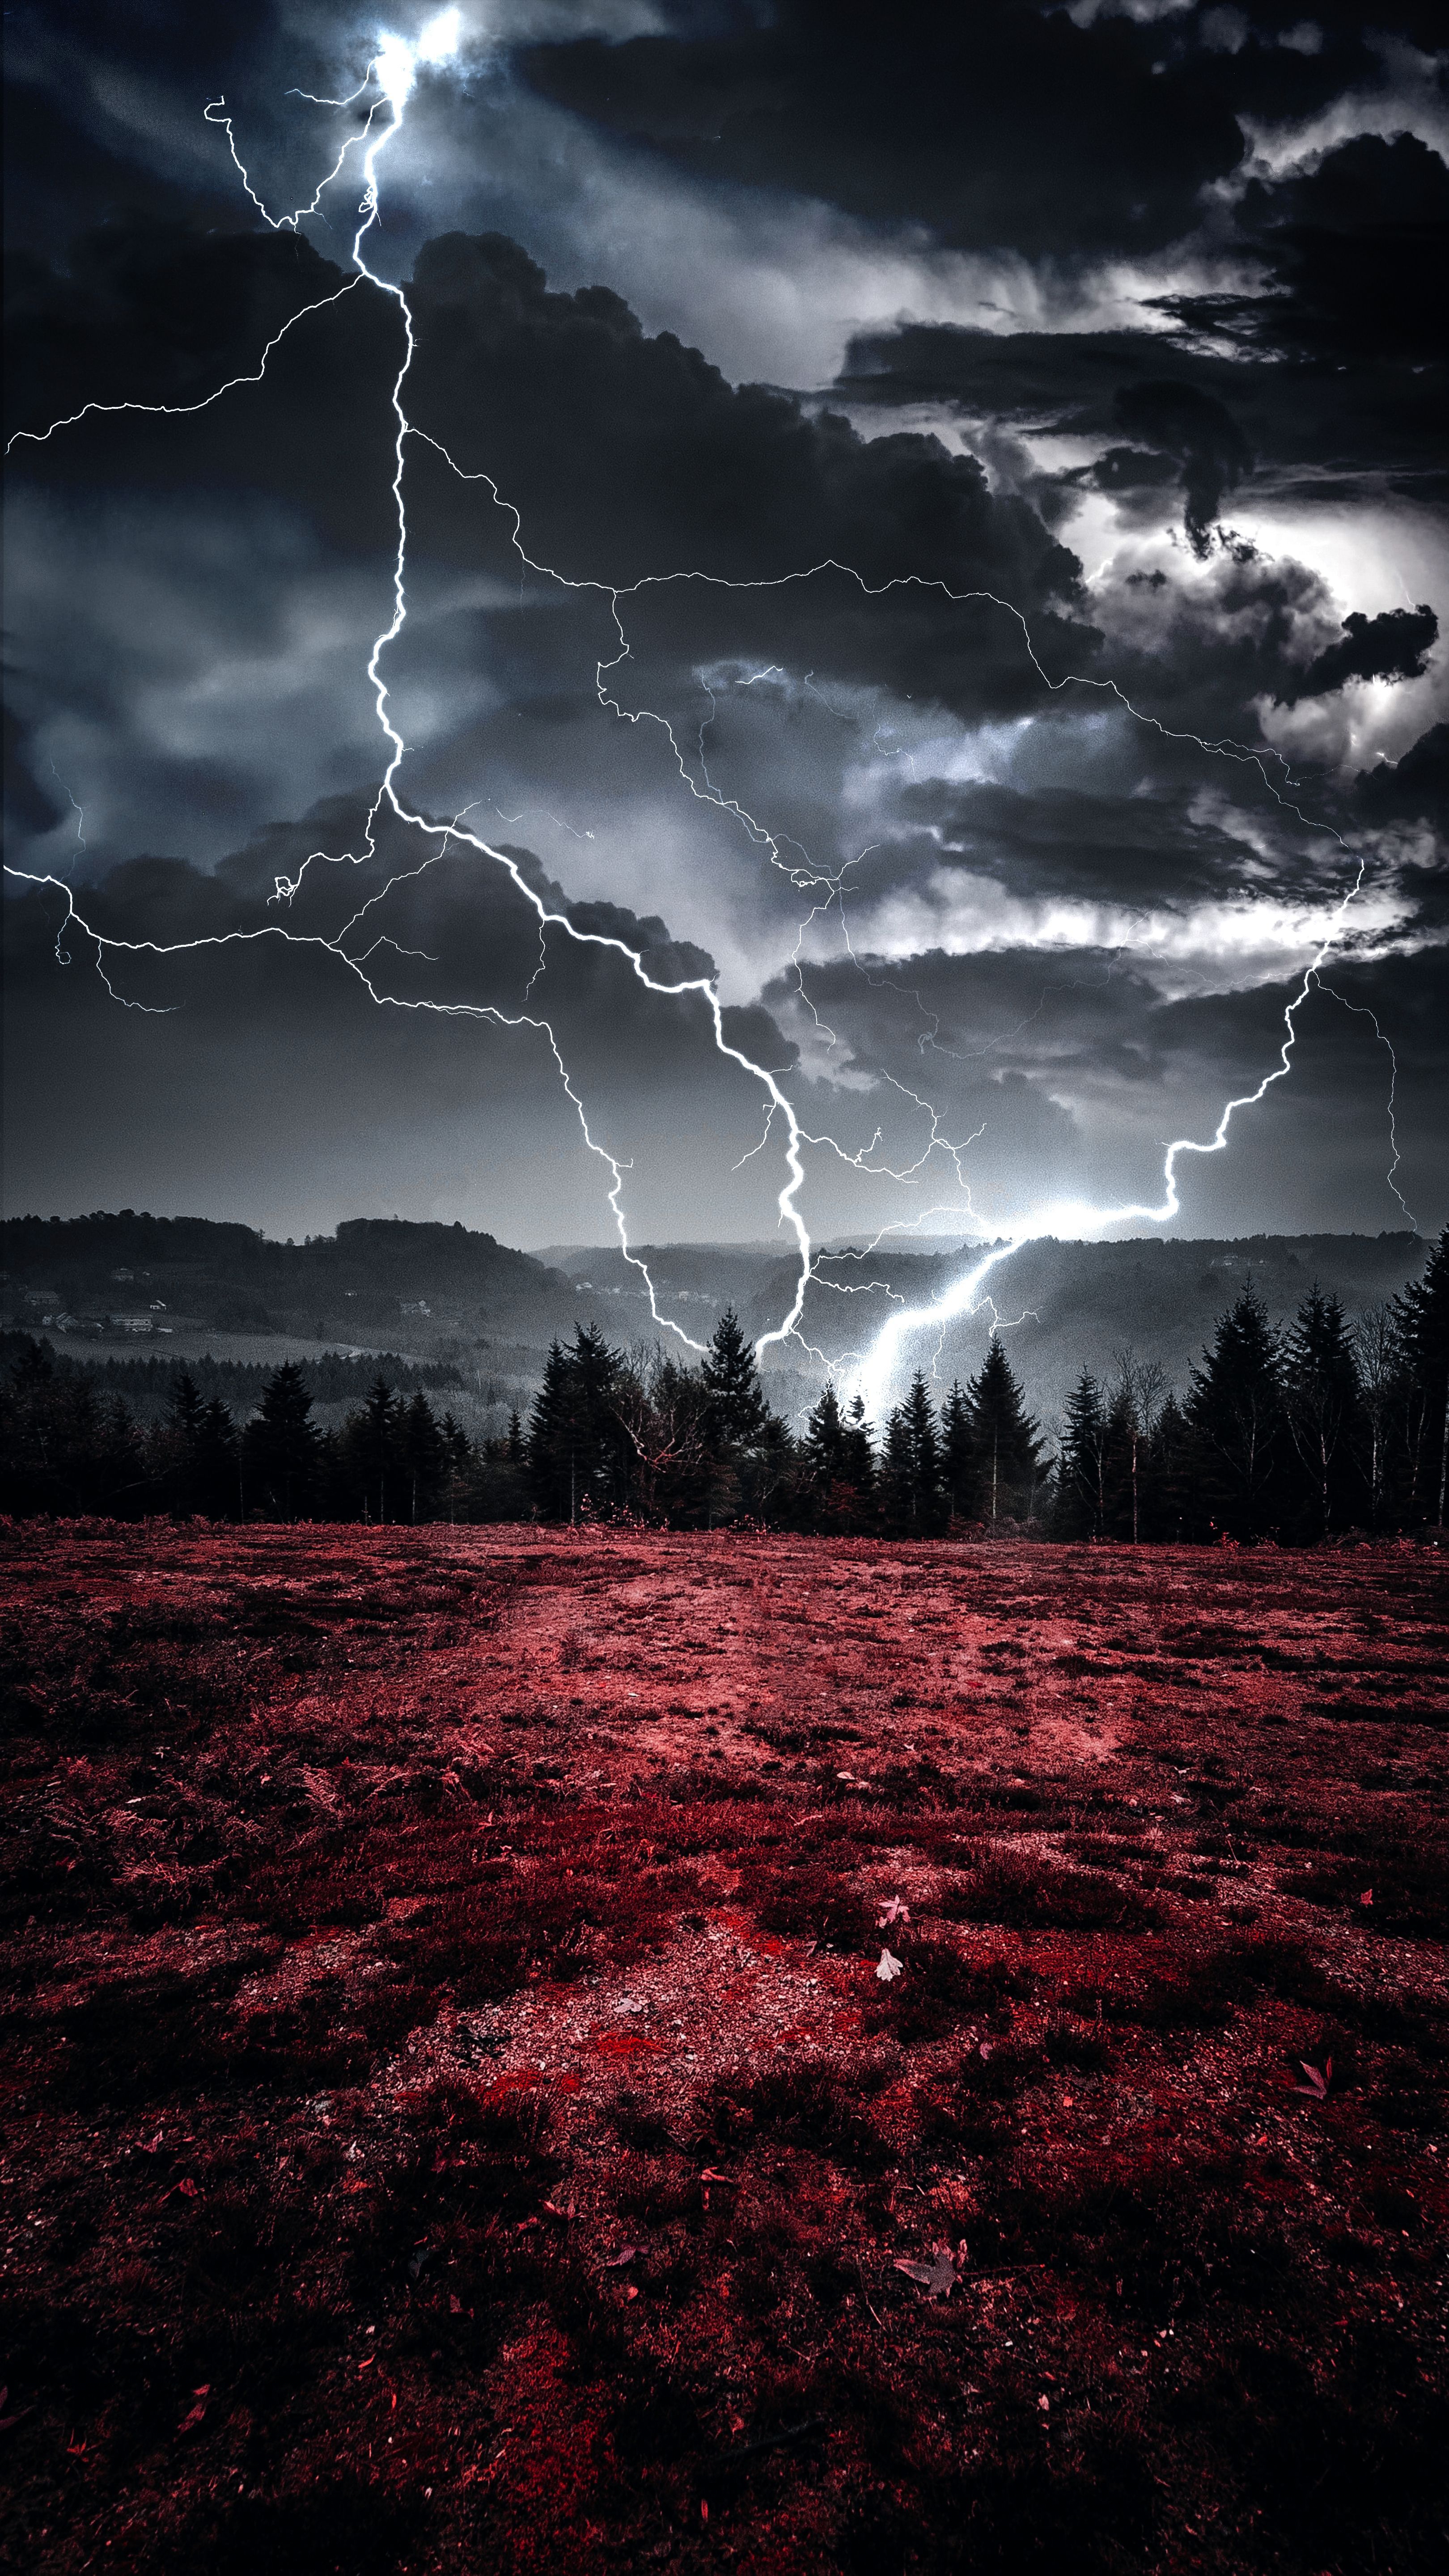 A red field with a dark sky and lightning - Lightning, storm